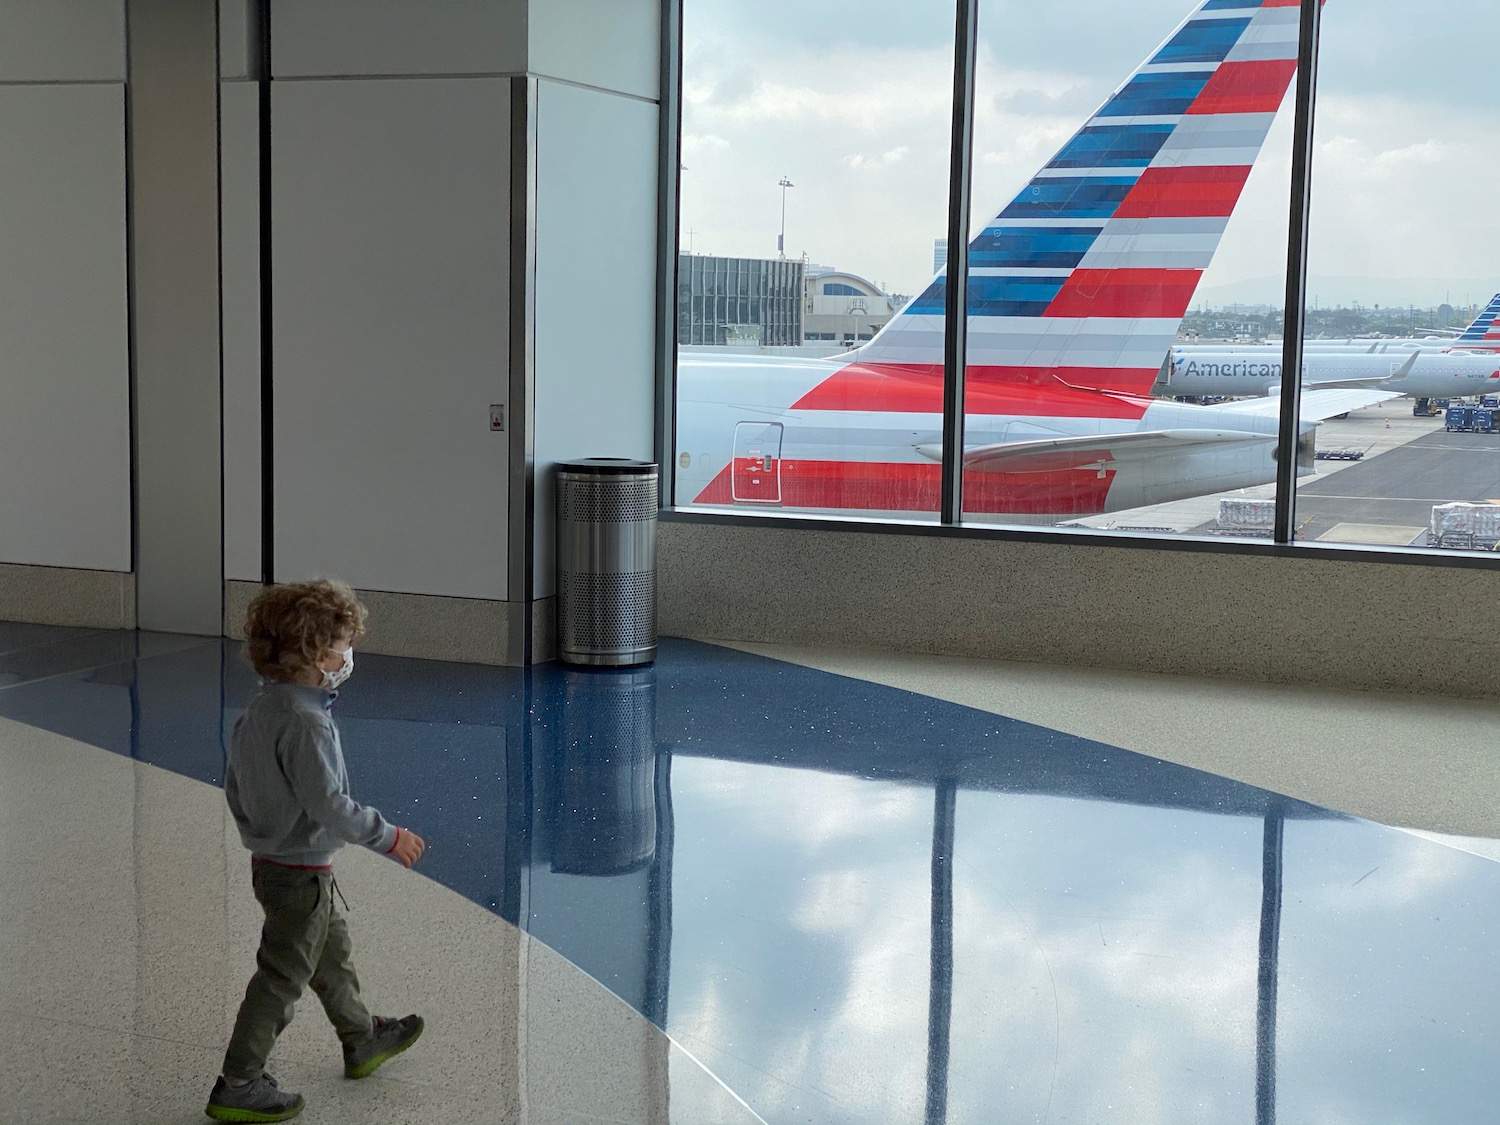 a child walking in a room with a plane in the background